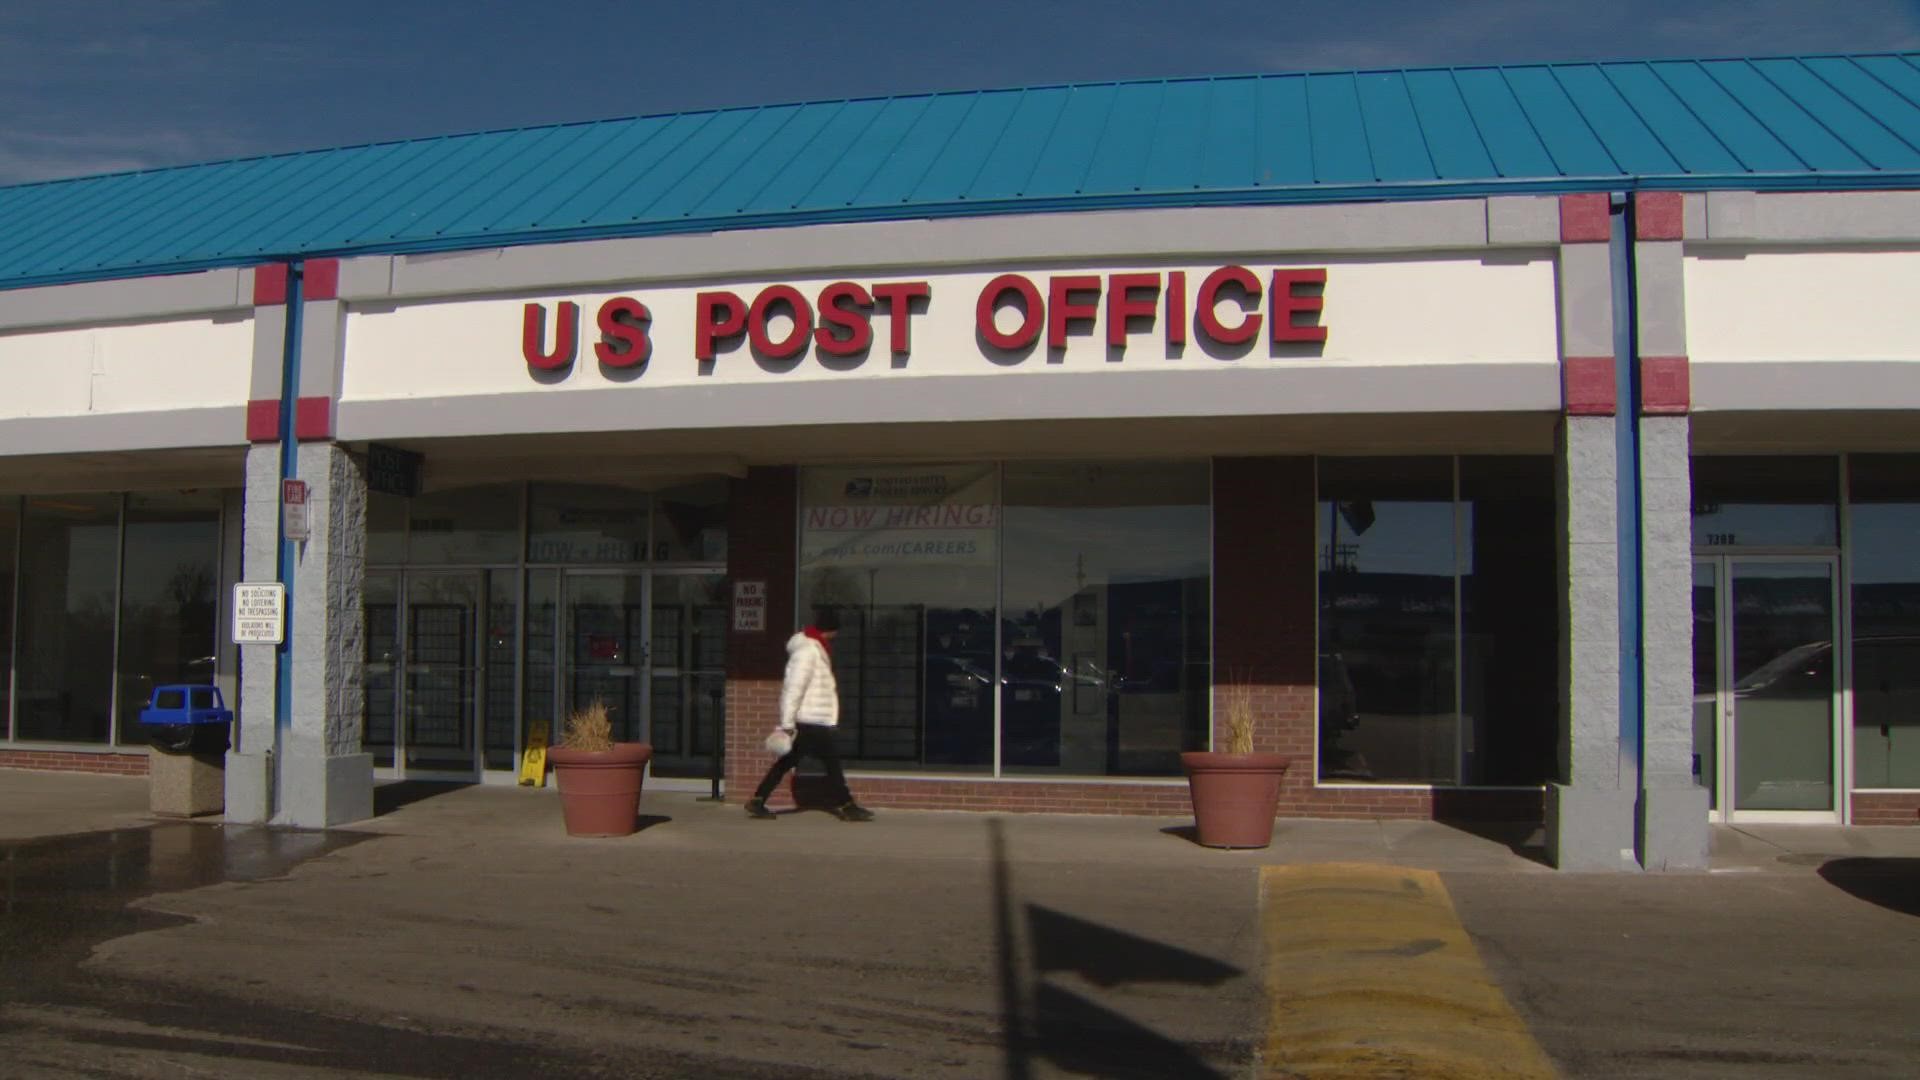 The mail delivery woes have been plaguing the mountain towns so much that lawmakers are getting involved, and a lawsuit is being considered.